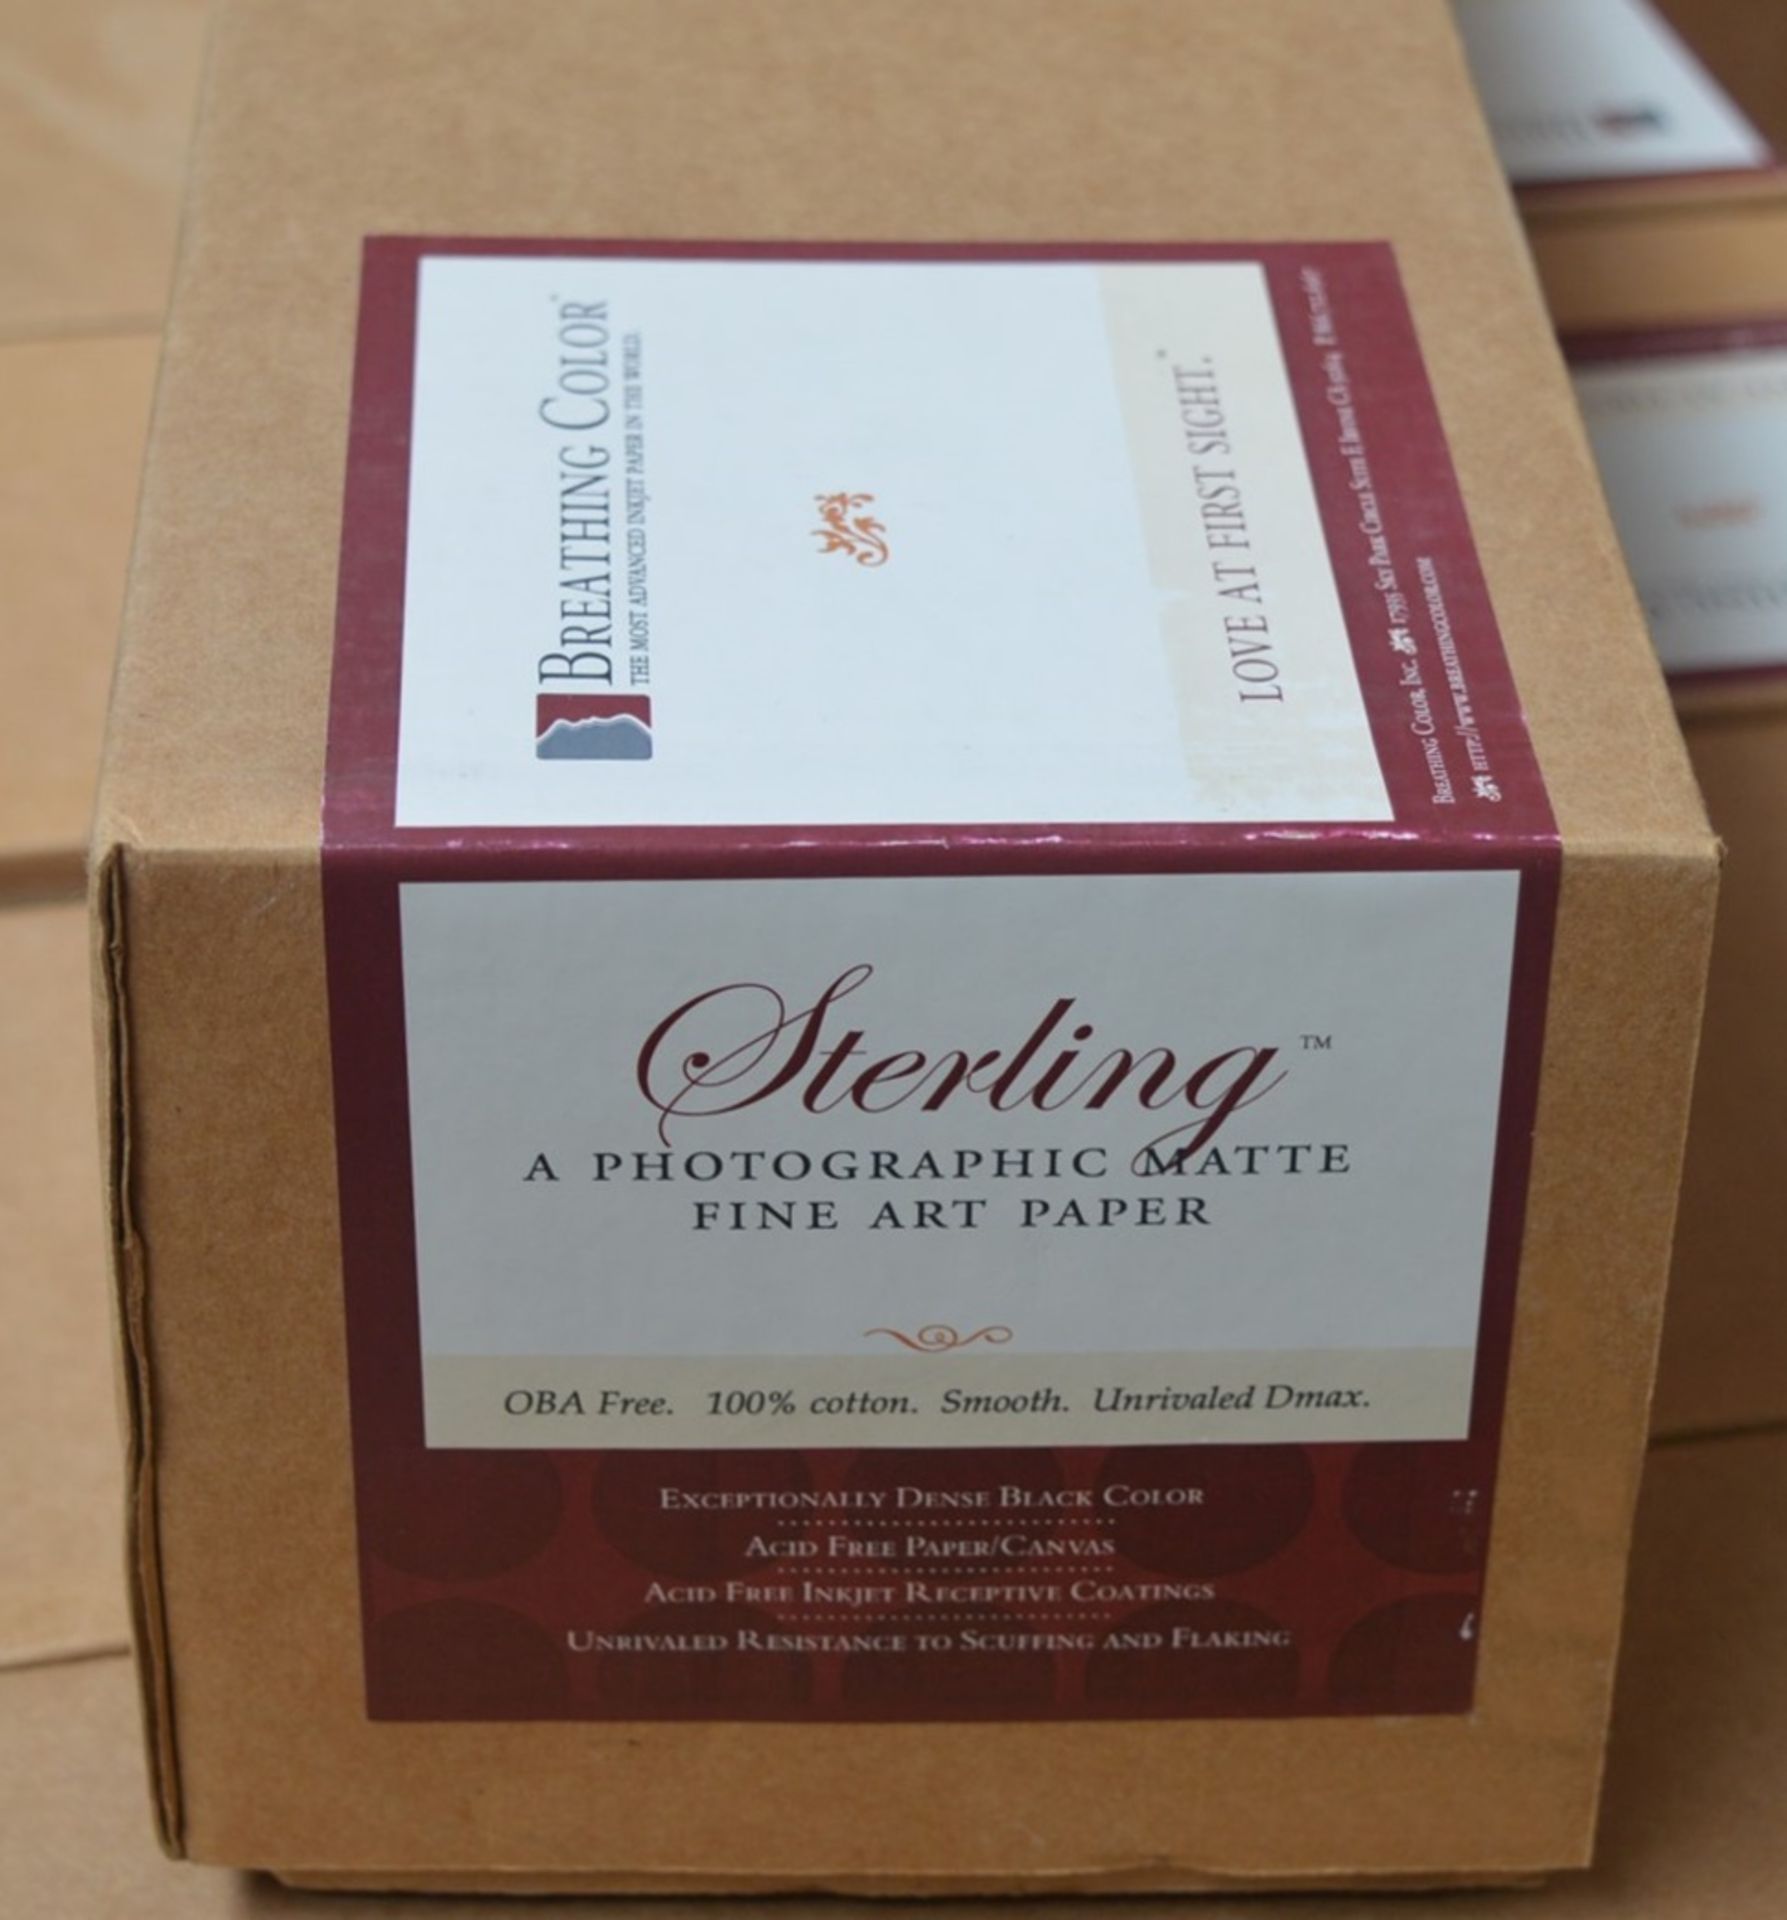 1 x Roll of Breathing Colour STERLING Photographic Matte Fine Art Paper - Size 24" x 40' - - Image 3 of 5